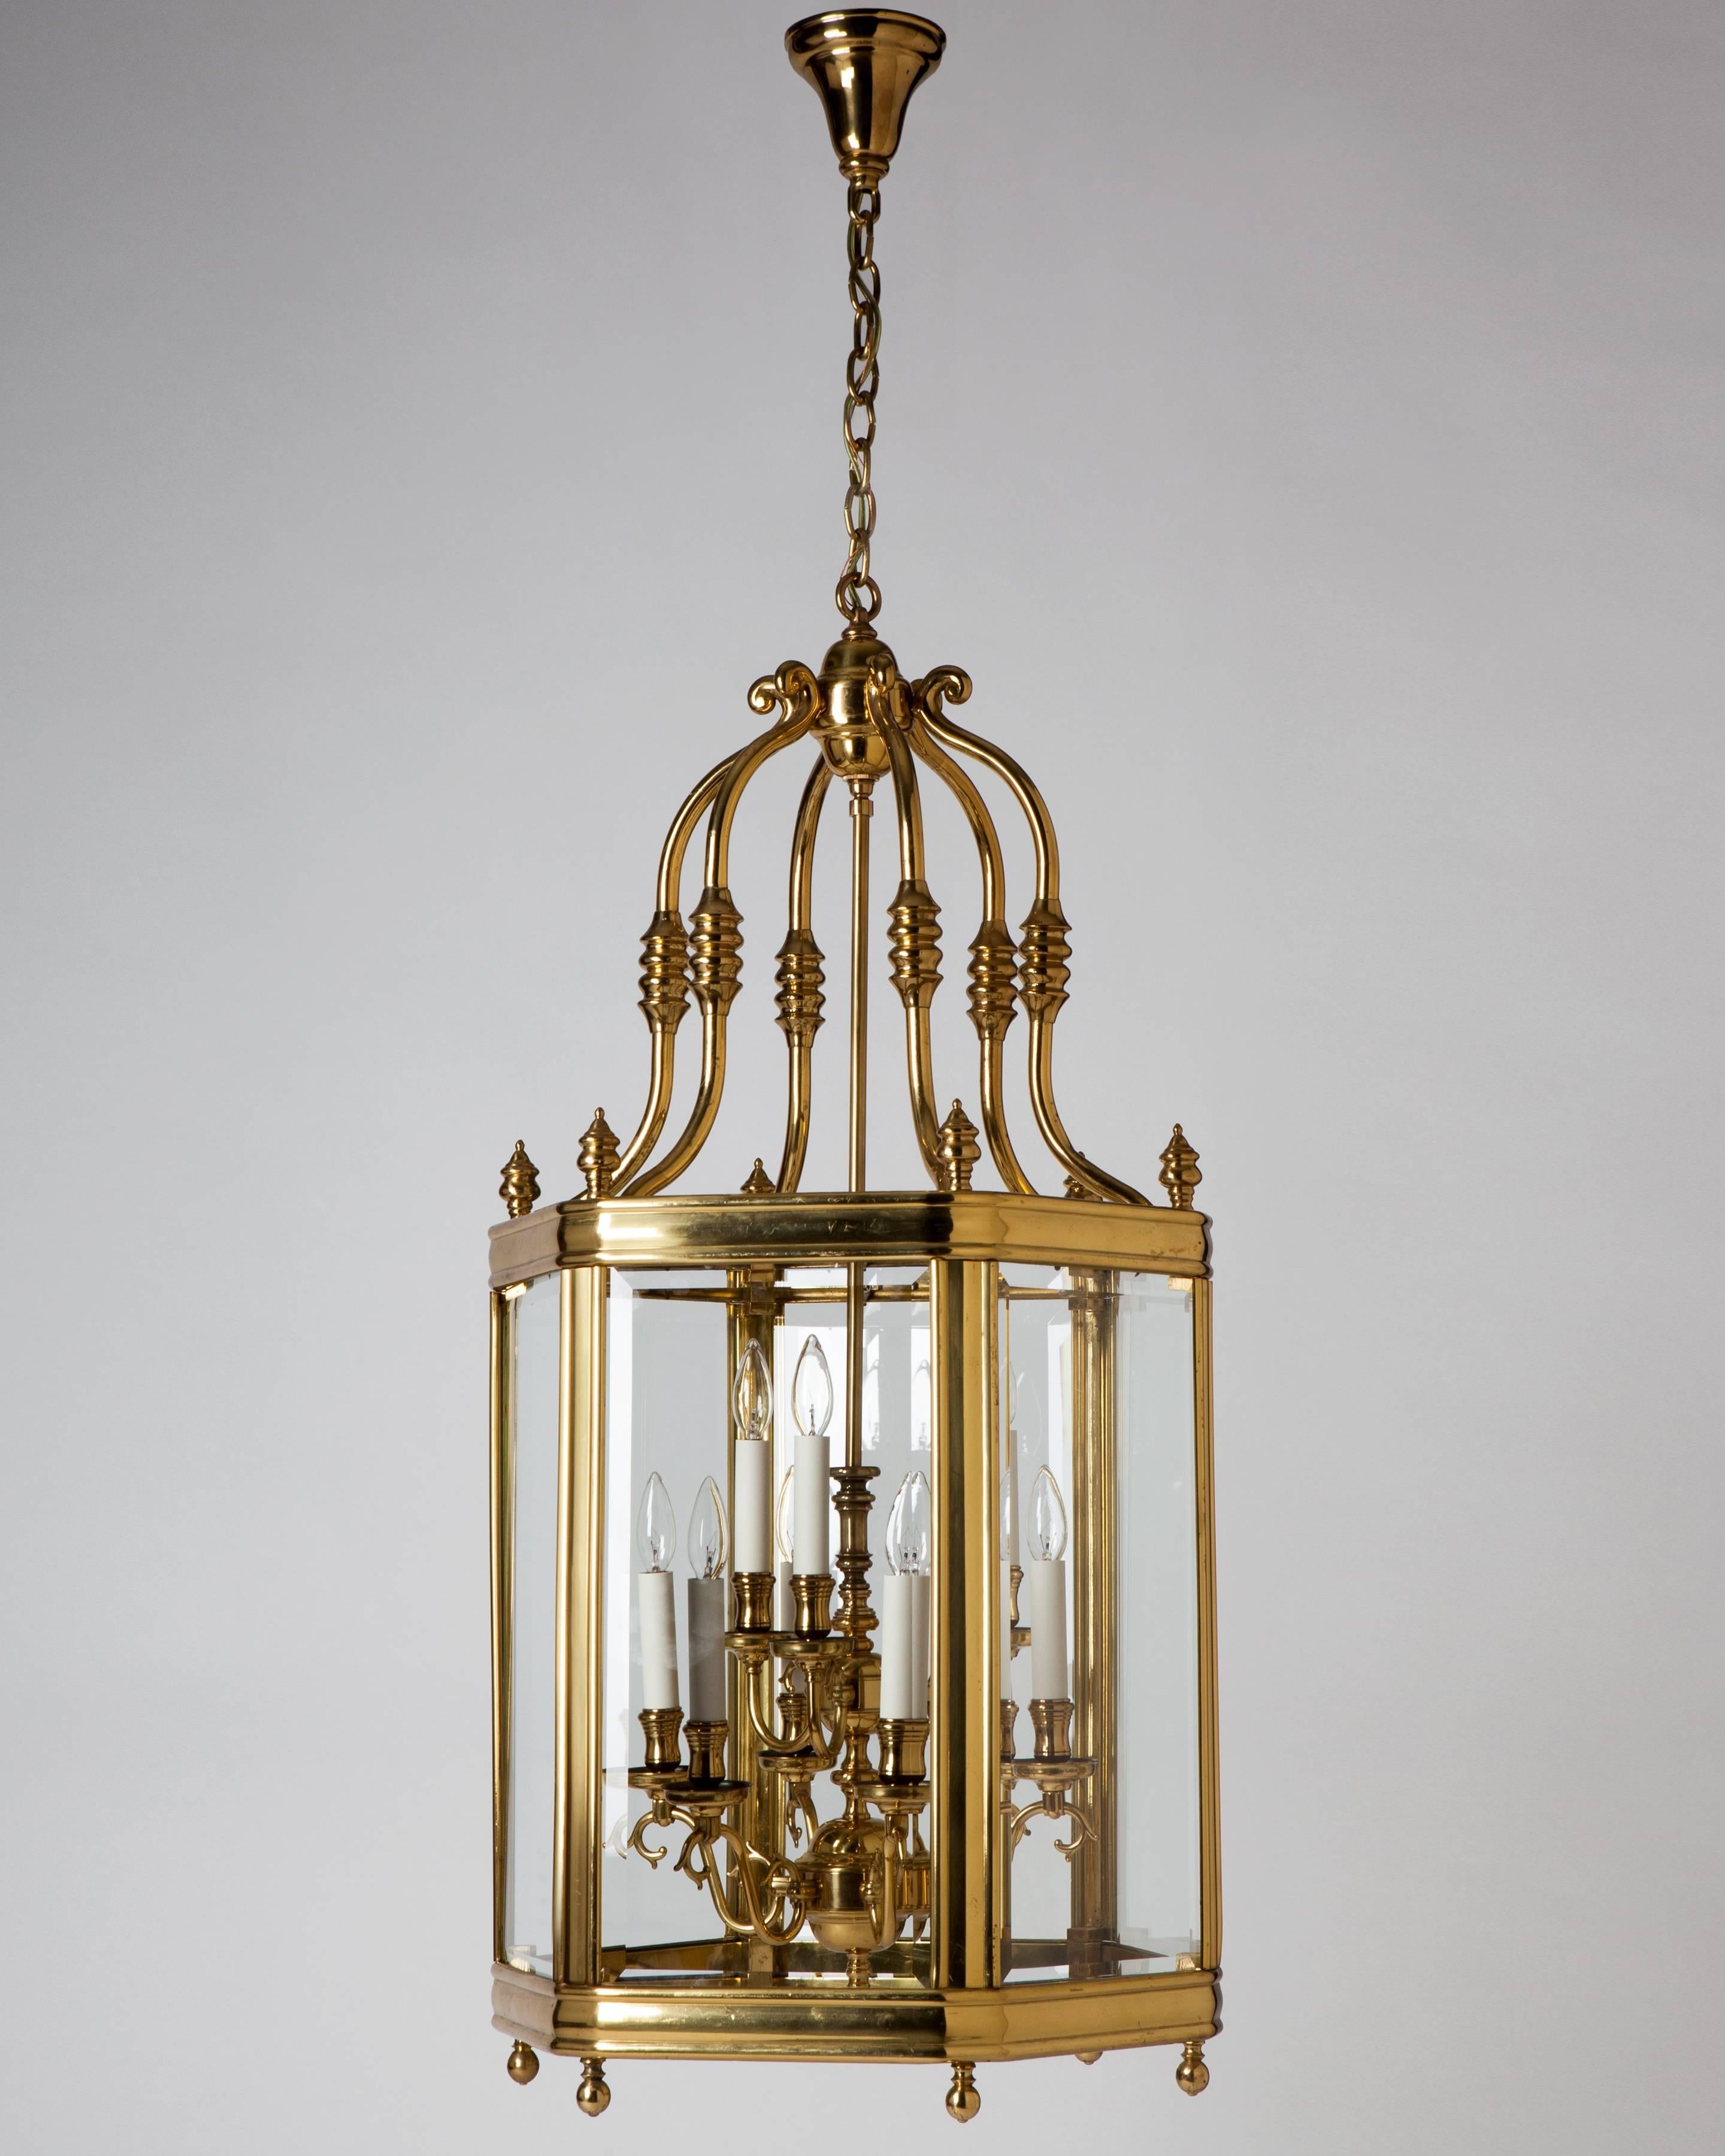 A vintage hexagonal lantern with a nine-light central cluster, all in its original polished brass finish, circa 1950. Glazed with clear bevelled glass panels.

Dimensions:
Current height 85